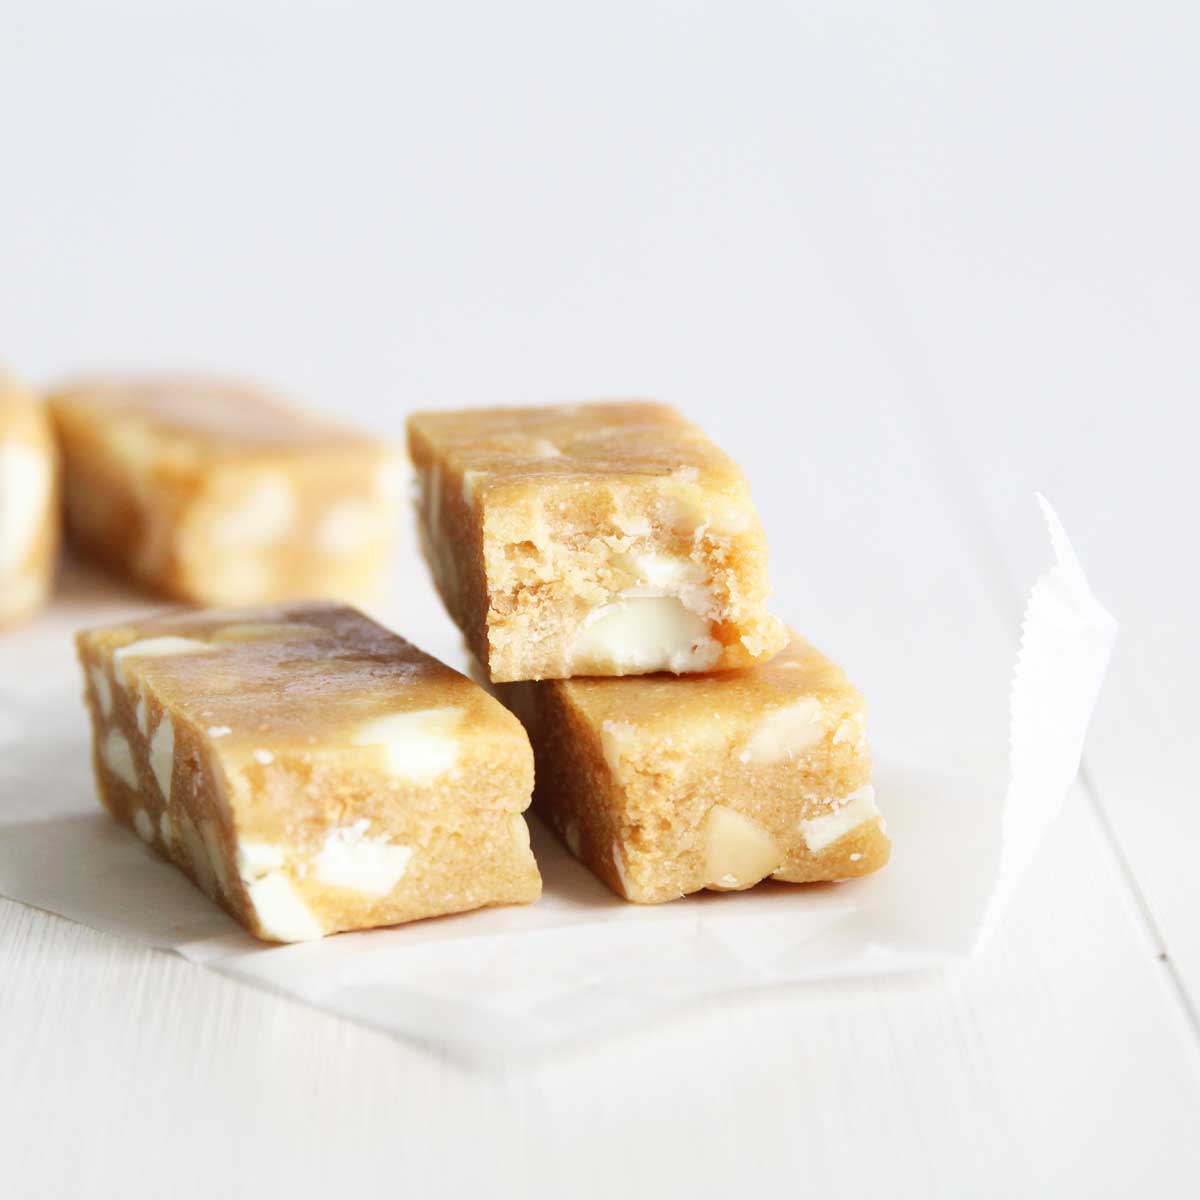 Chunky White Chocolate Macadamia Protein Bars Recipe (made with Collagen Peptides) - birthday cake protein bars